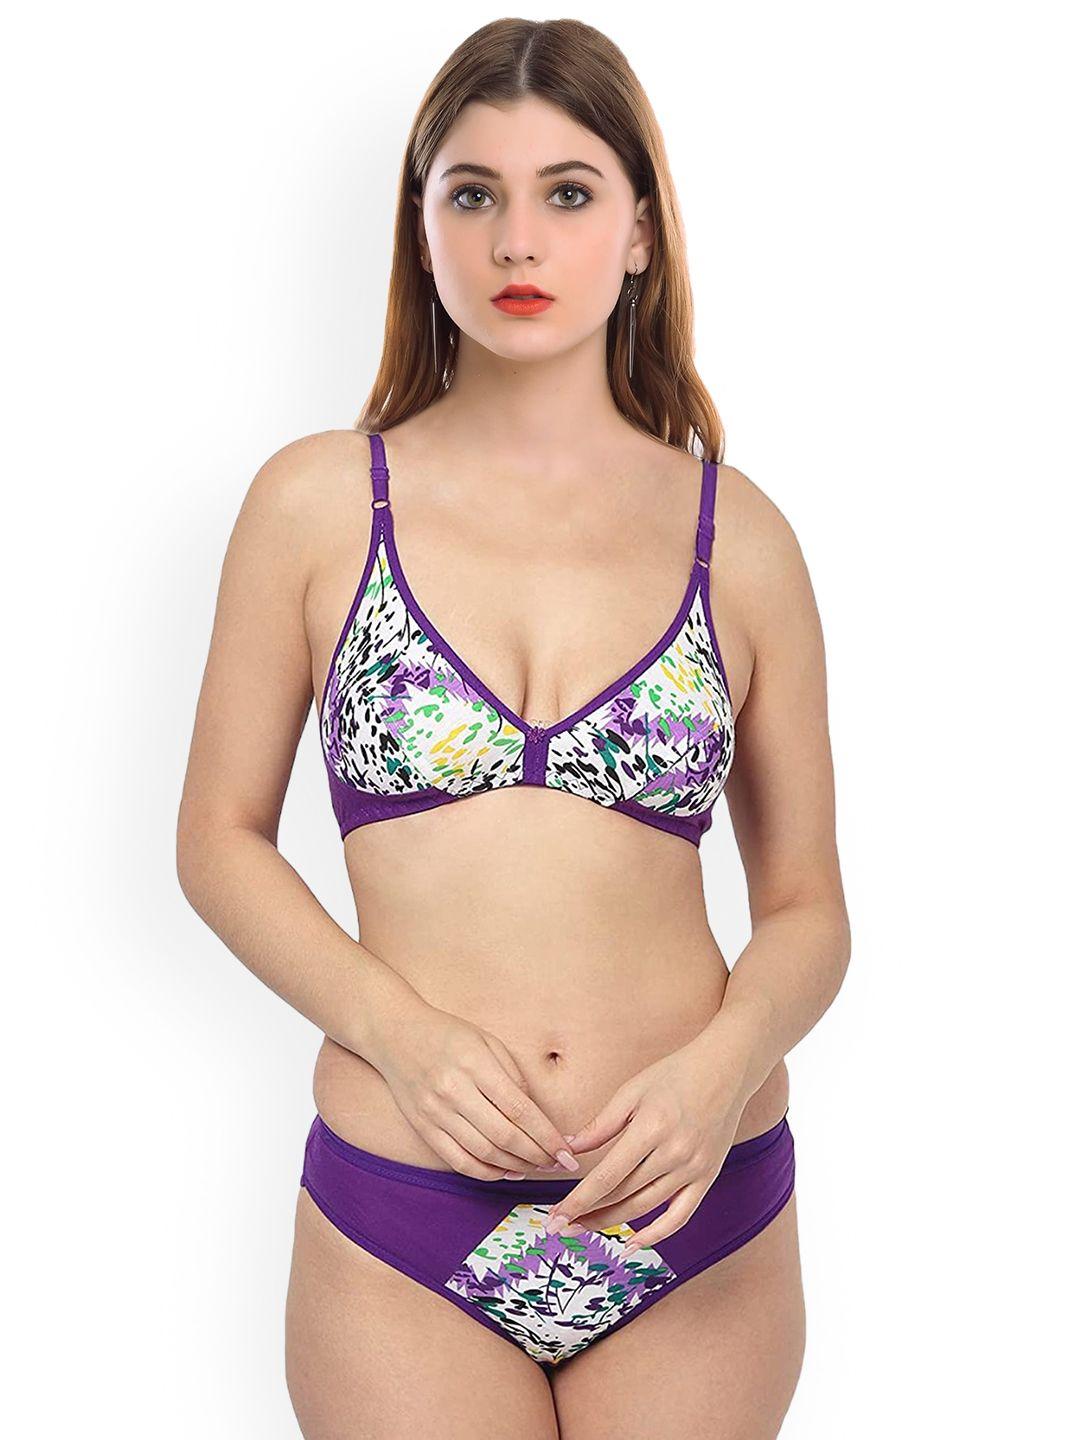 arousy printed non padded cotton lingerie set by_tiger set_purple_34